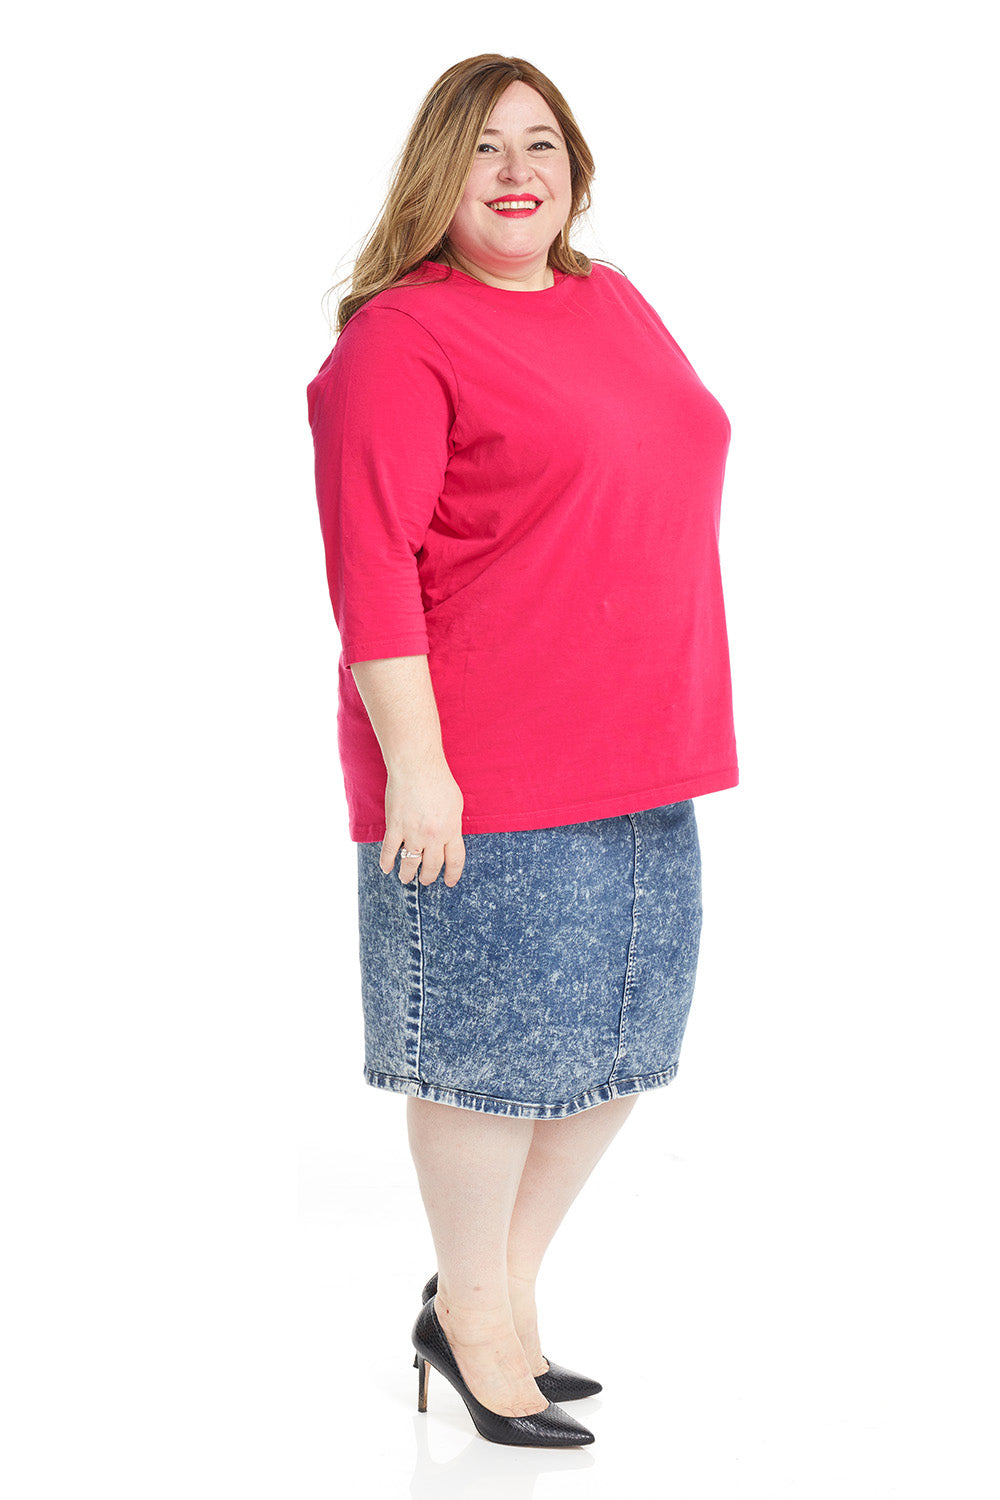 acid wash plus size below the knee denim jean skirt with pockets and tummy control